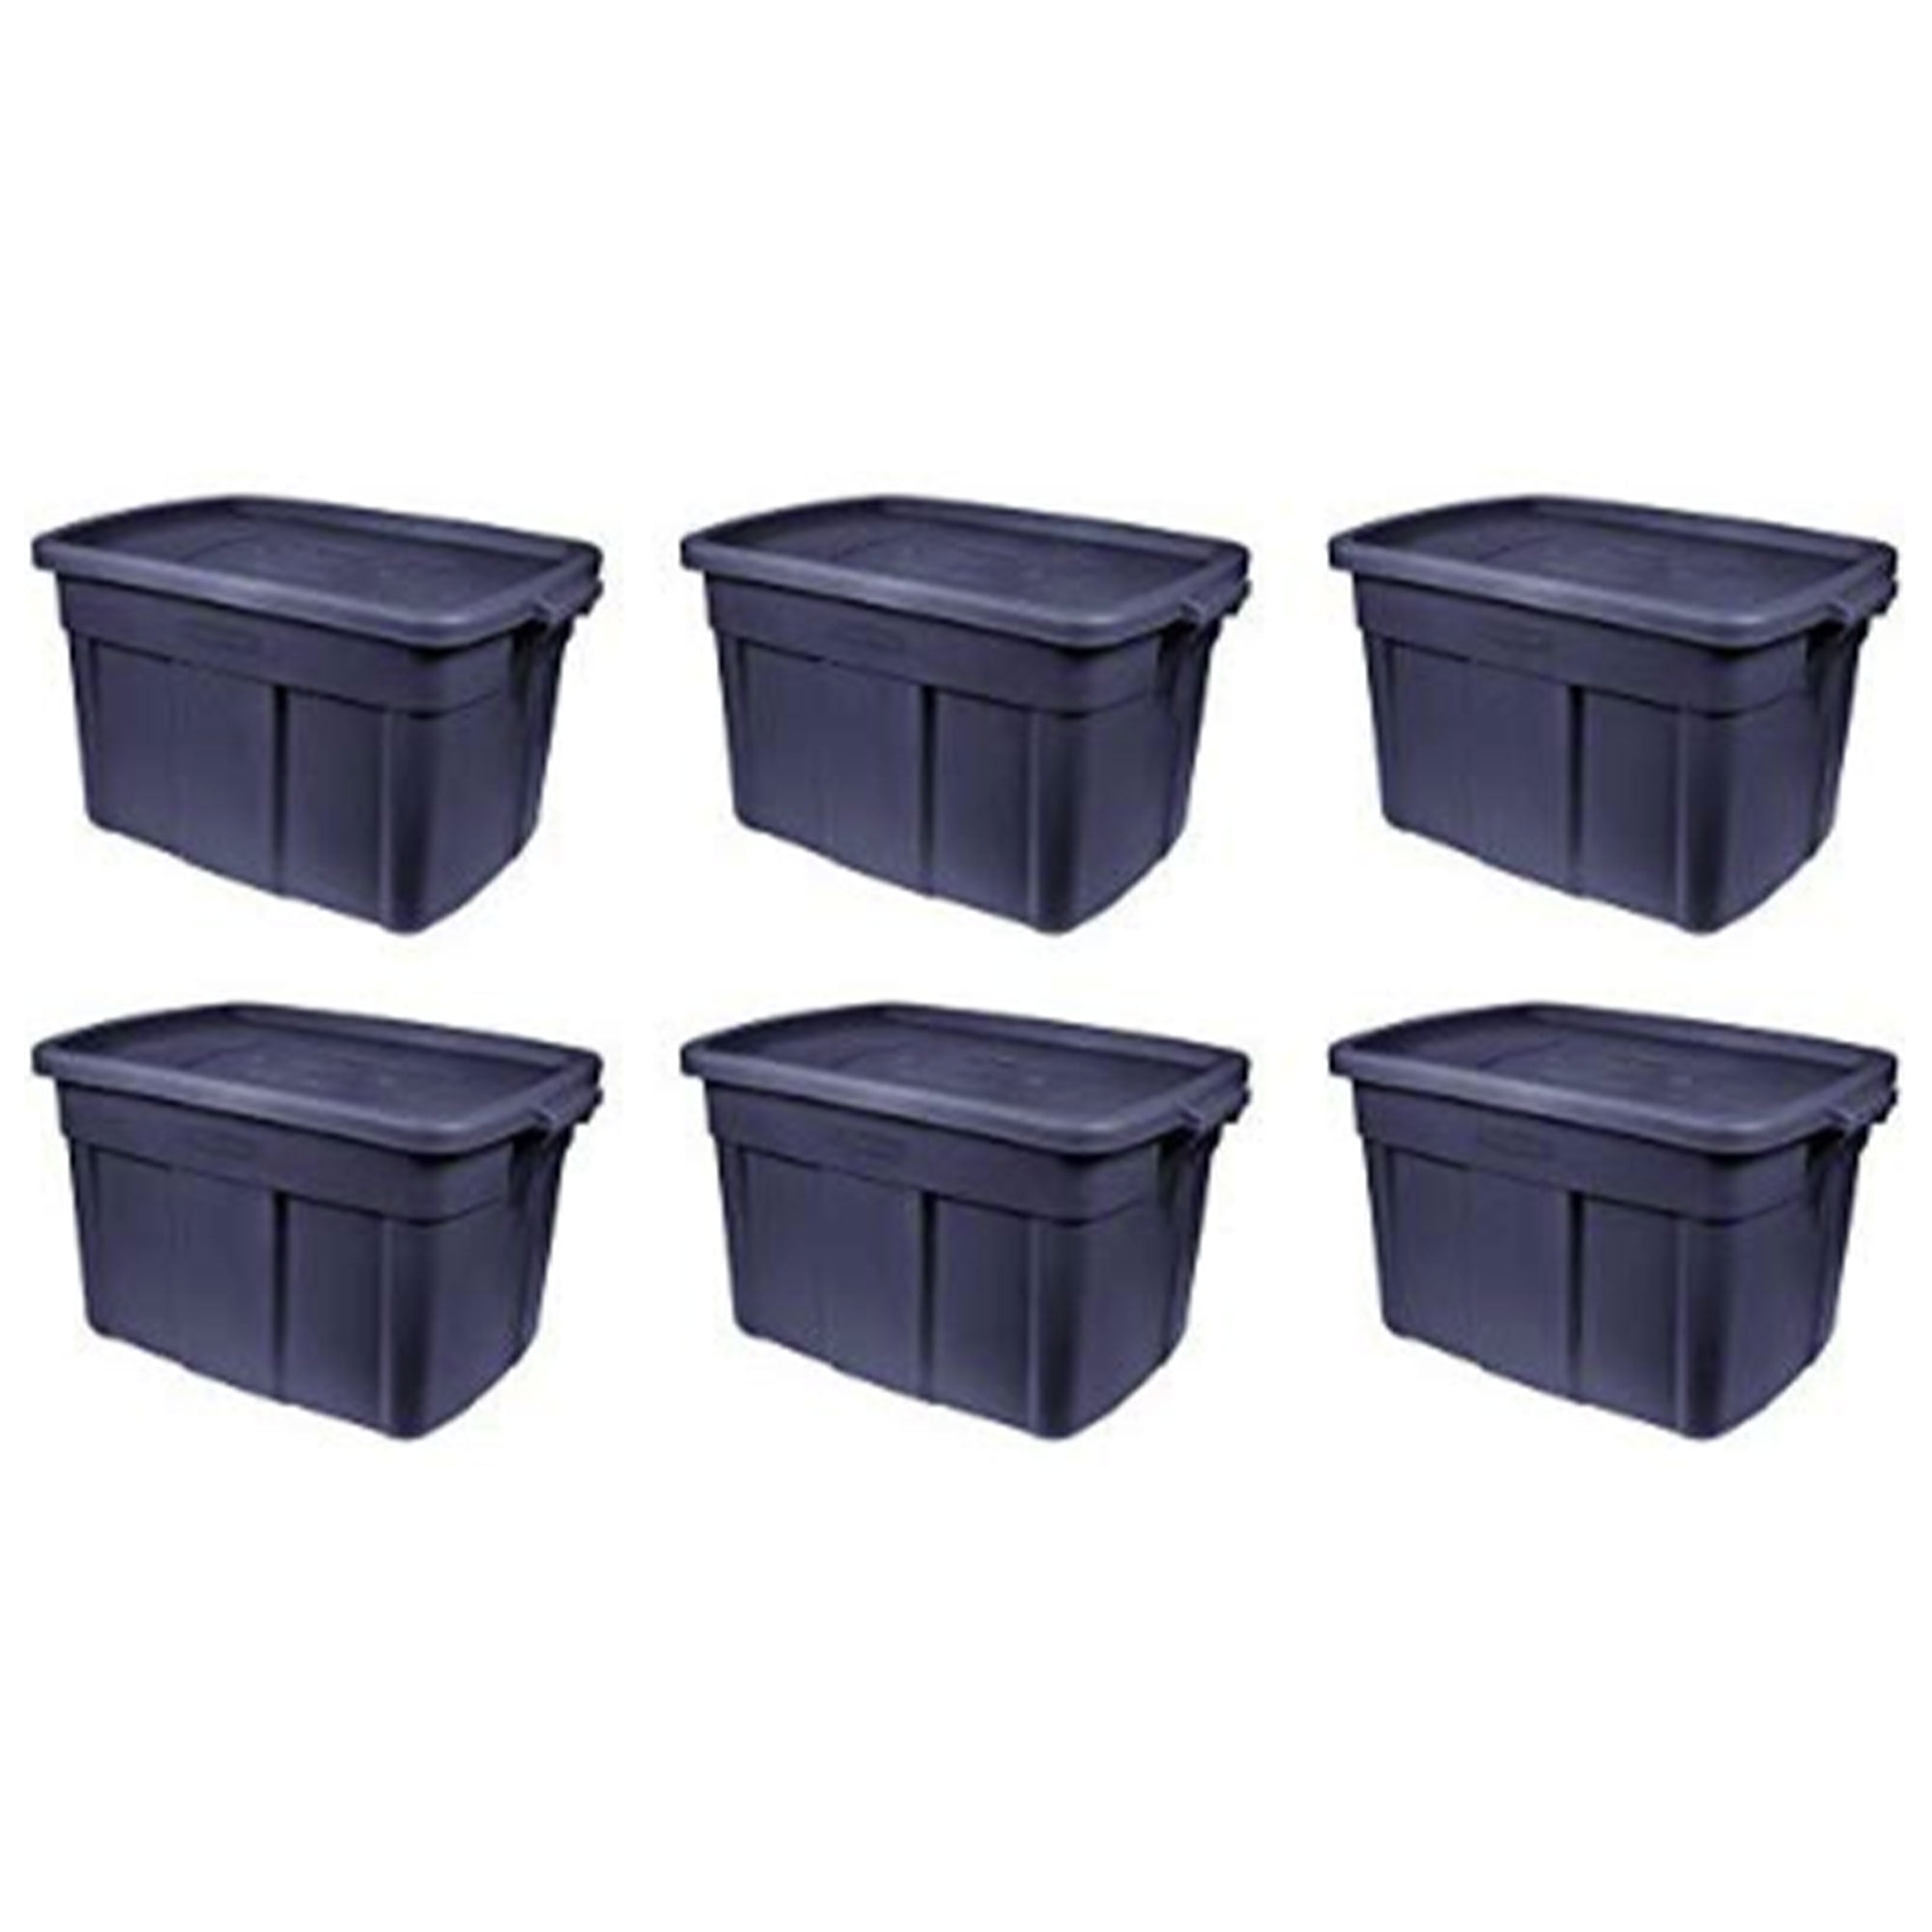 Rubbermaid Roughneck 18-Gal. Storage Tote Container Organizer in Black/Cool Gray (6-pack)